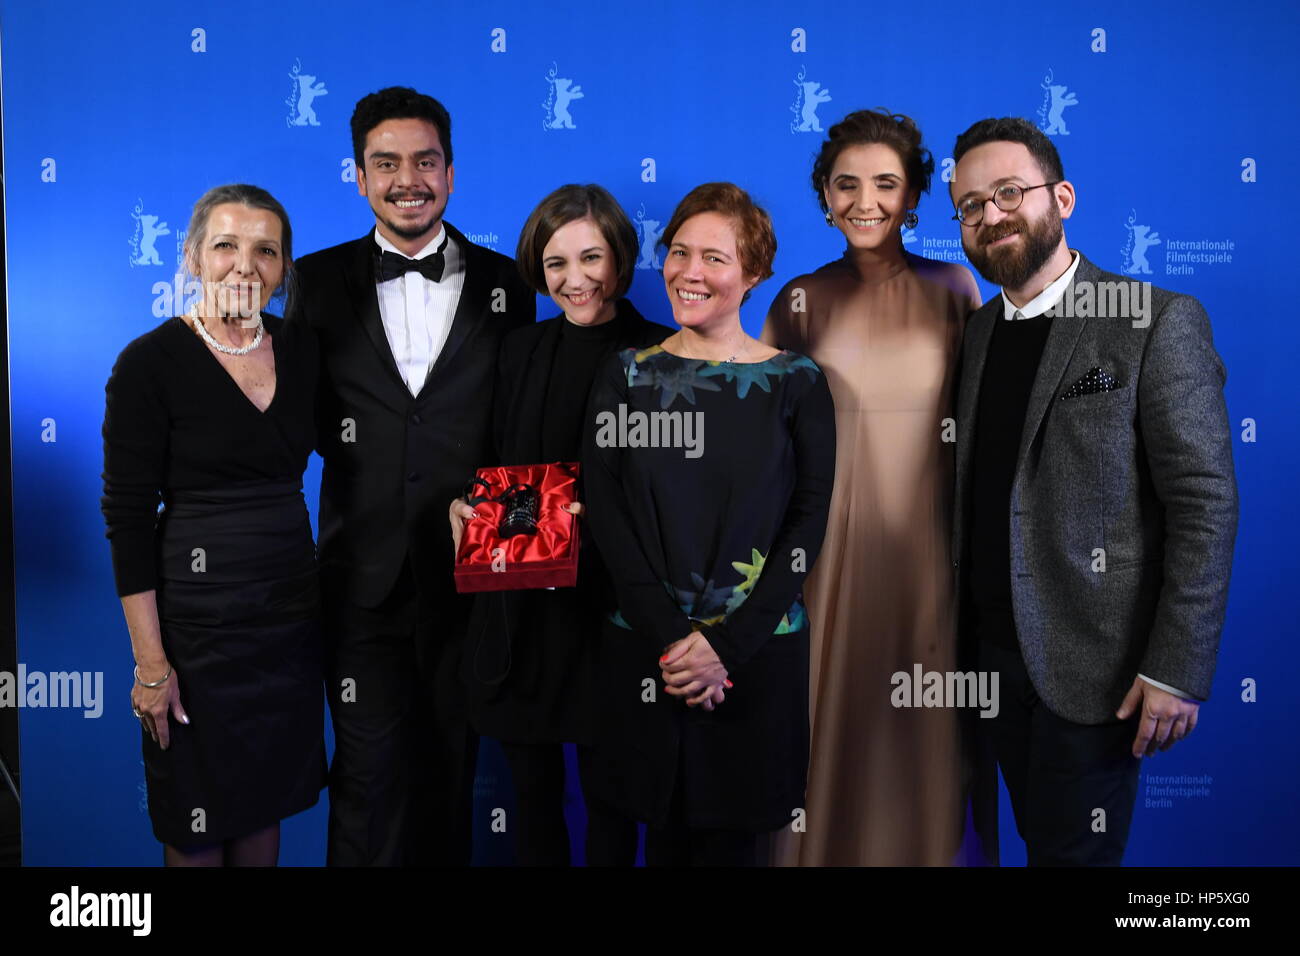 Berlin, Germany. 18th Feb, 2017. Director Carla Simon (center l), who received an award for Best Newcomer for the movie 'Summer 1993'/'Estiu 1993', poses with producer Valerie Delpiere (c) and her team (not identified) at the 67th International Berlin Film Festival in Berlin, Germany, 18 February 2017. 18 movies ran in the competition of the Berlinale film festival. Photo: Britta Pedersen/dpa-Zentralbild/dpa/Alamy Live News Stock Photo